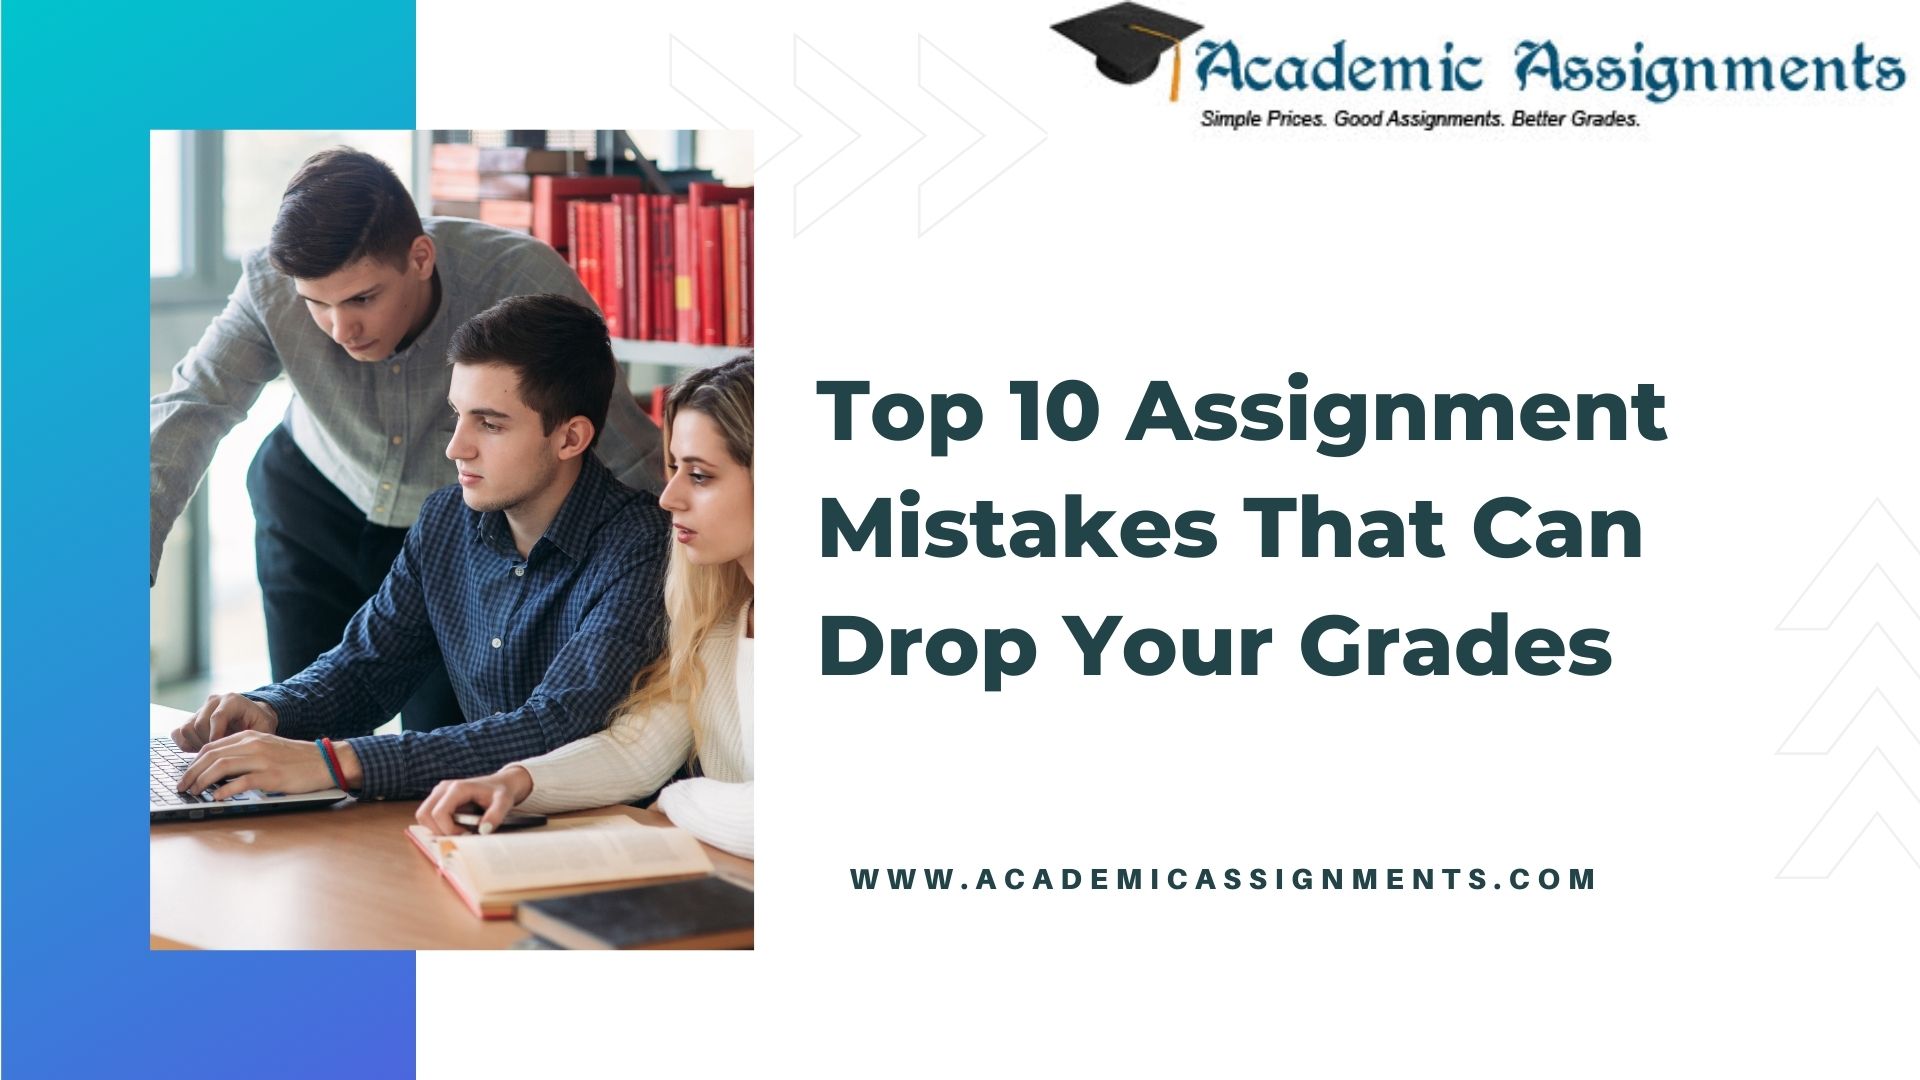 Top 10 Assignment Mistakes That Can Drop Your Grades